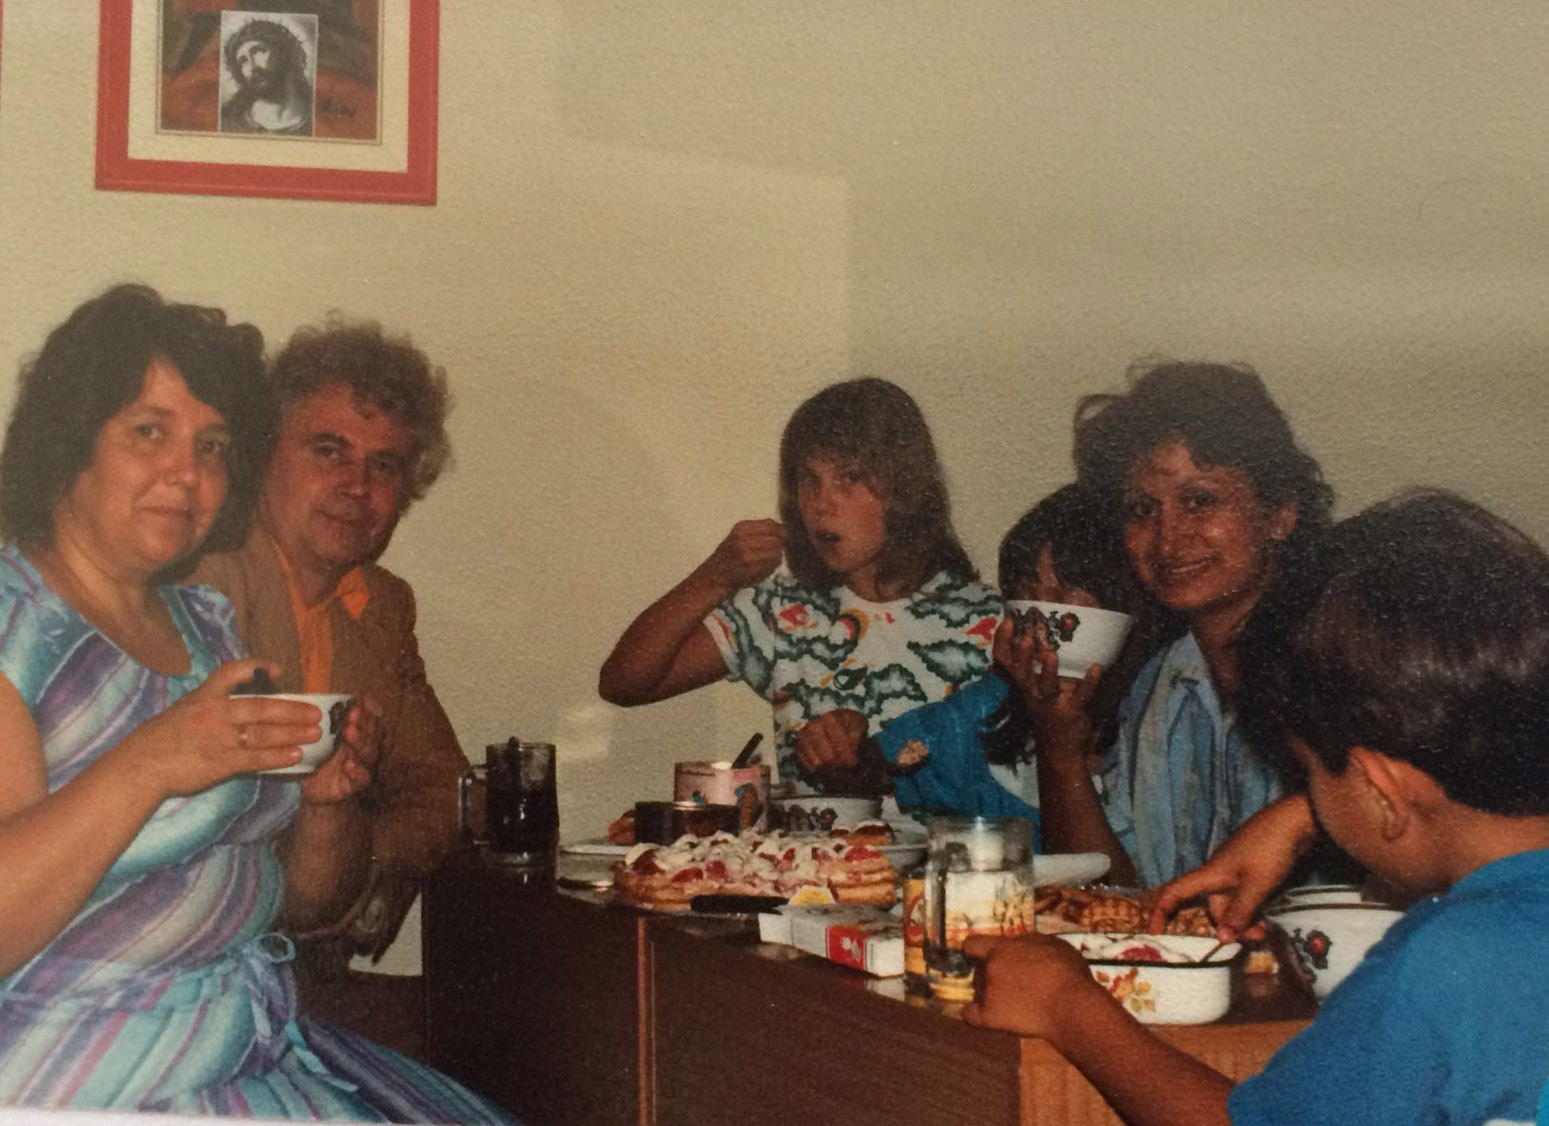 Dina's mother with Russians in an Italian refugee camp in 1989. (Courtesy of Dina Nayeri)